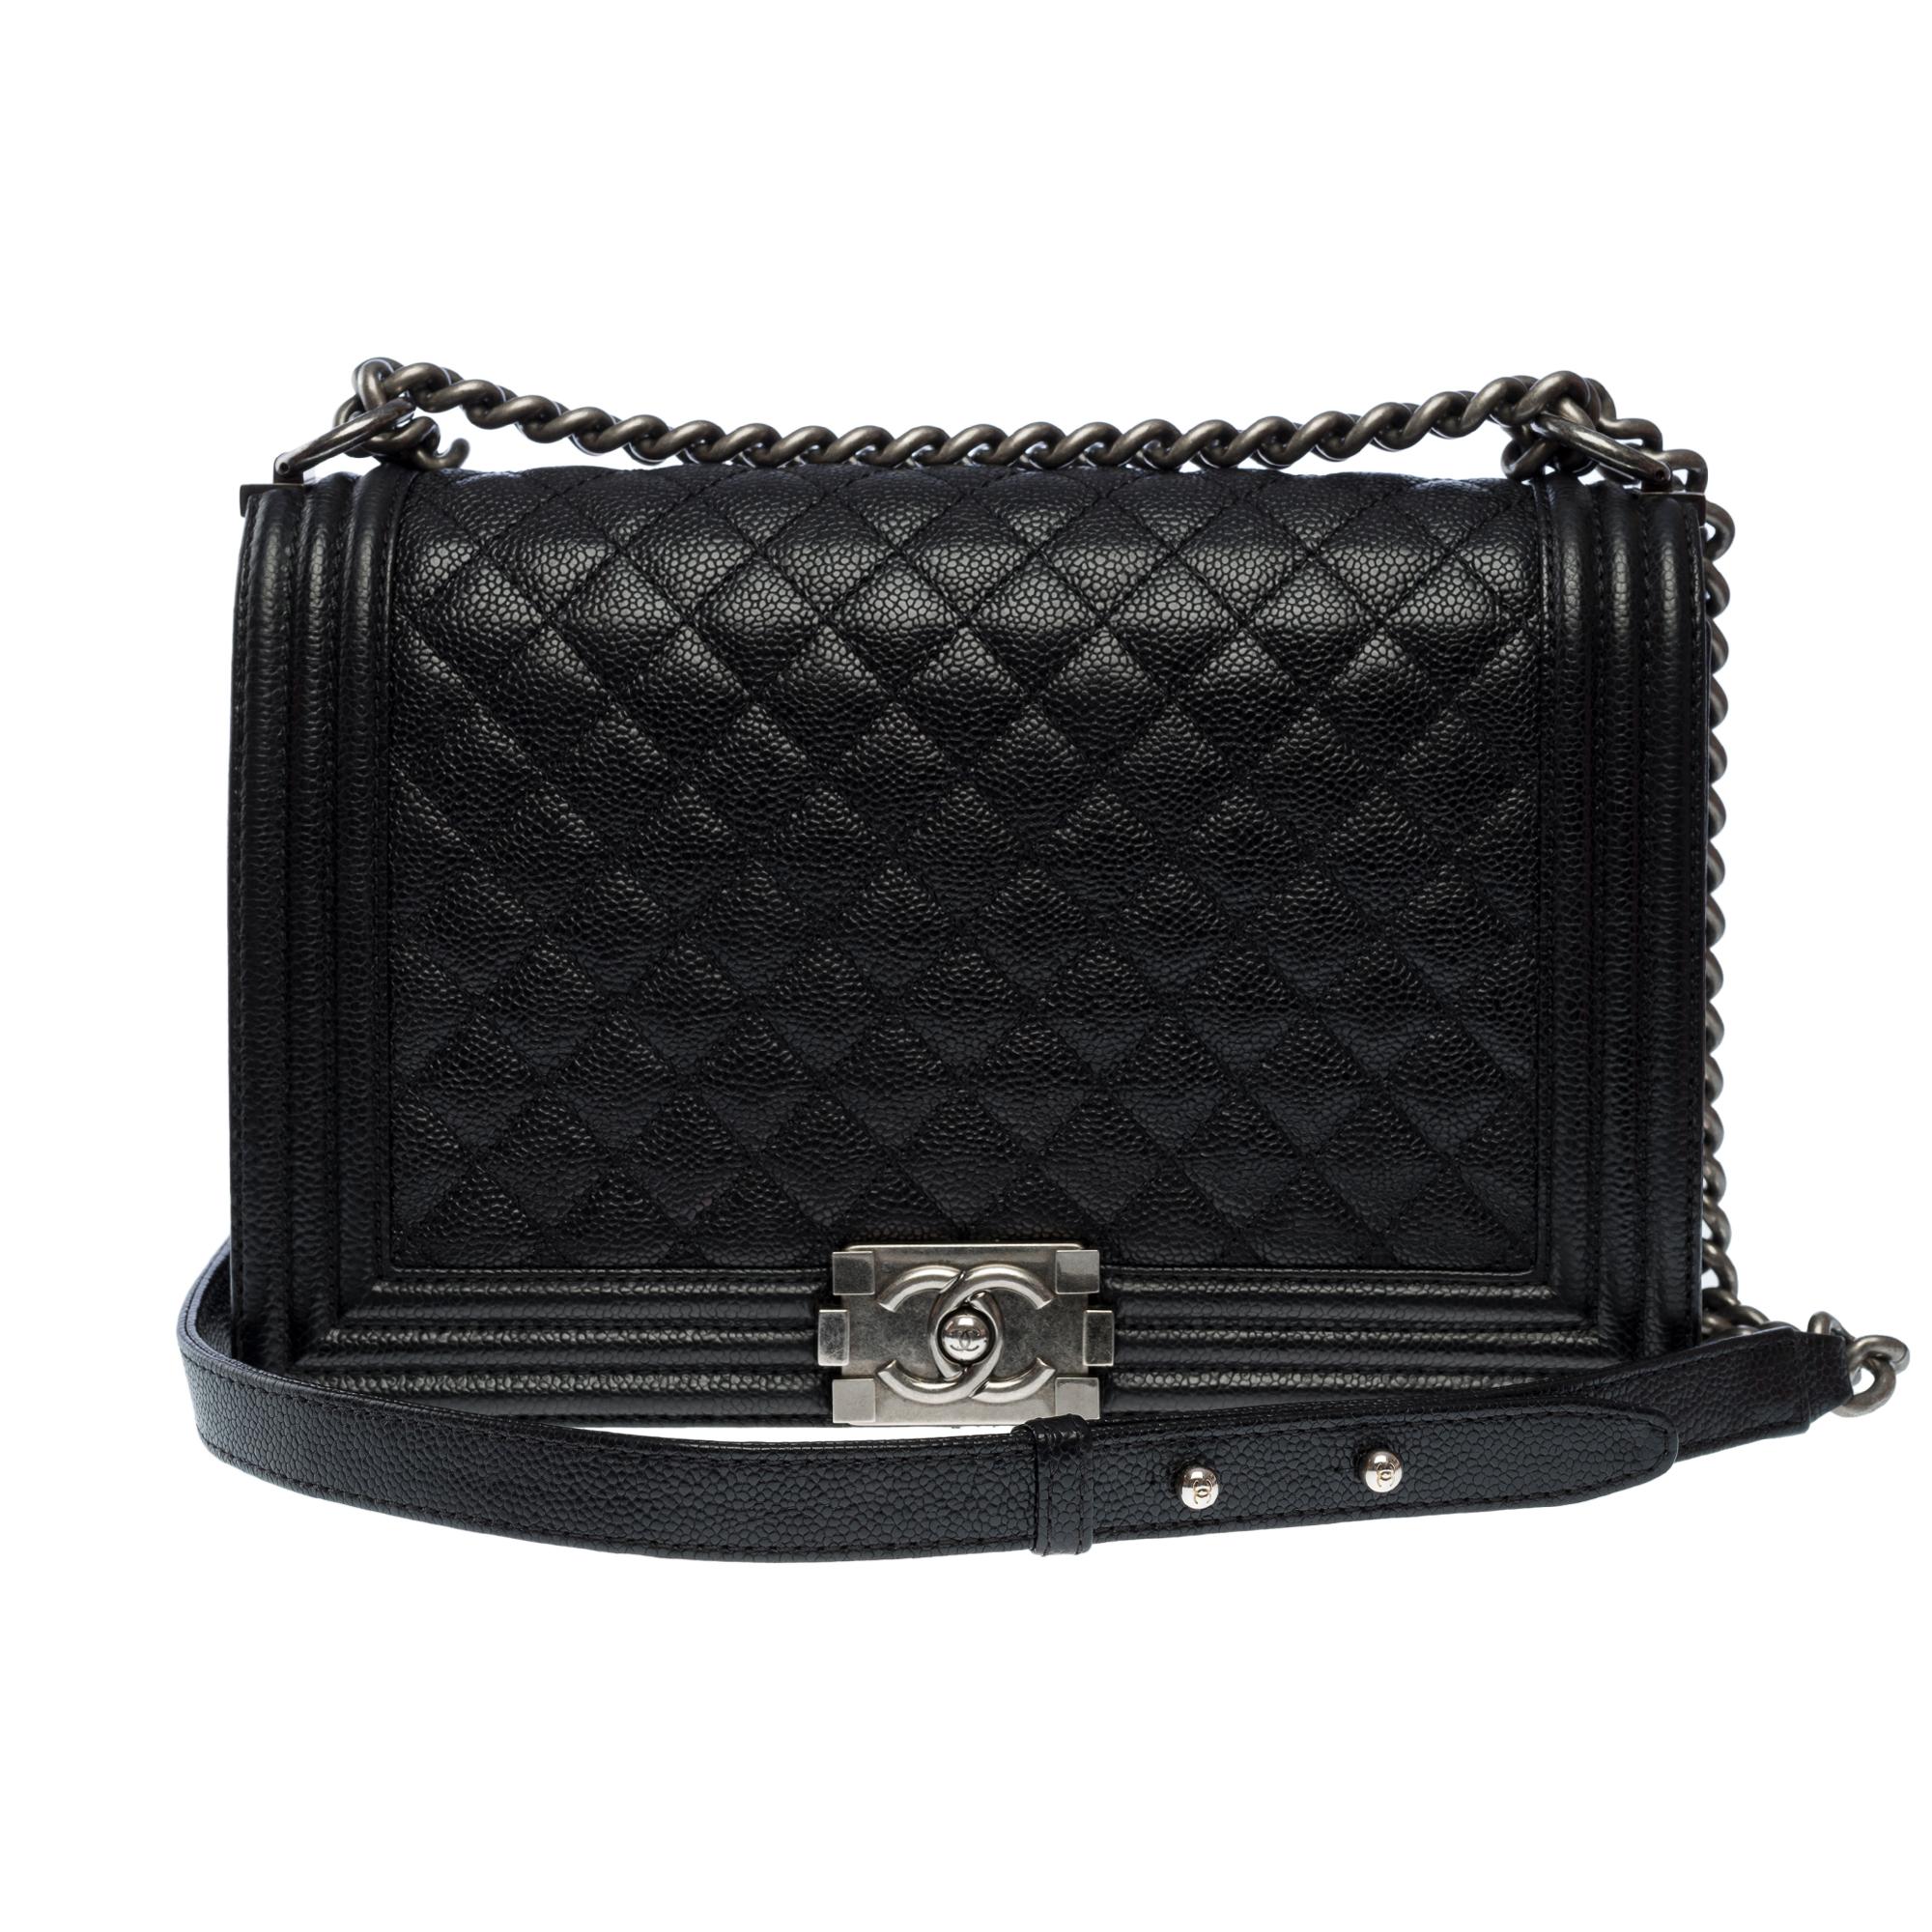 Chanel Boy New medium shoulder bag in black caviar quilted leather, SHW ! For Sale 5